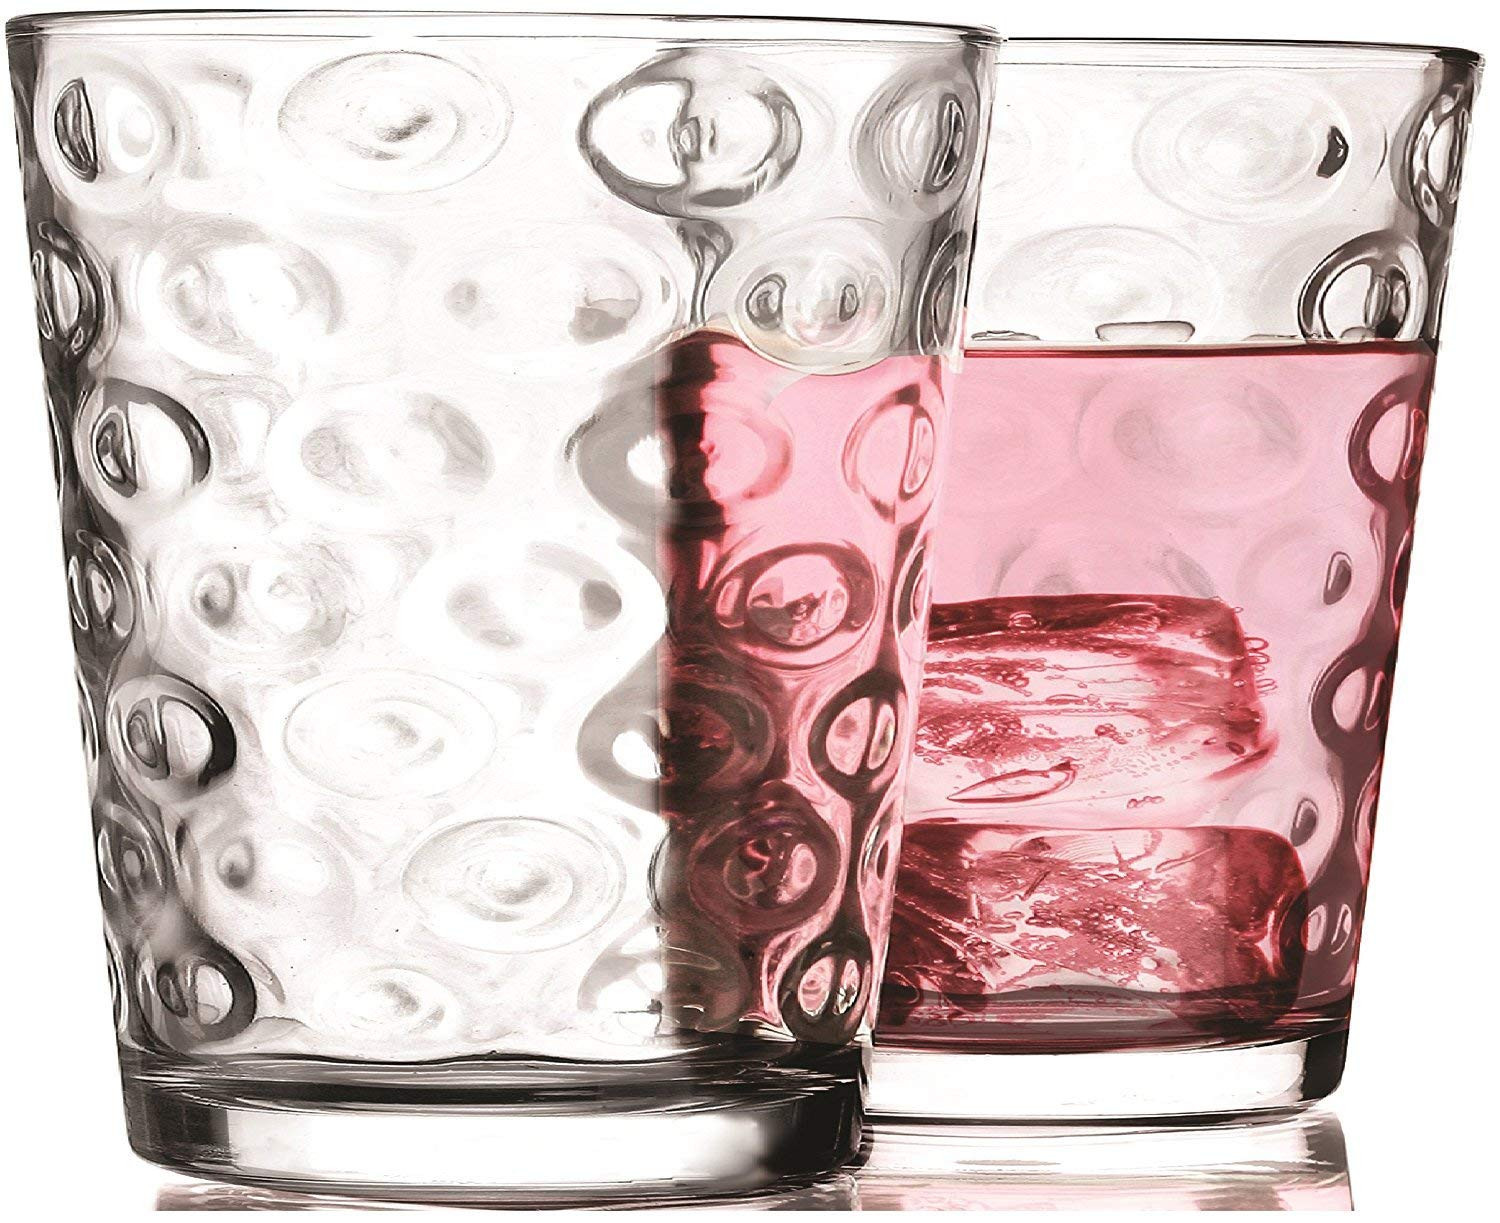 10 Lovable Amazon Clear Glass Vases 2024 free download amazon clear glass vases of amazon com circleware 44516 circles drinking glassware products inside amazon com circleware 44516 circles drinking glassware products clear mixed drinkware sets